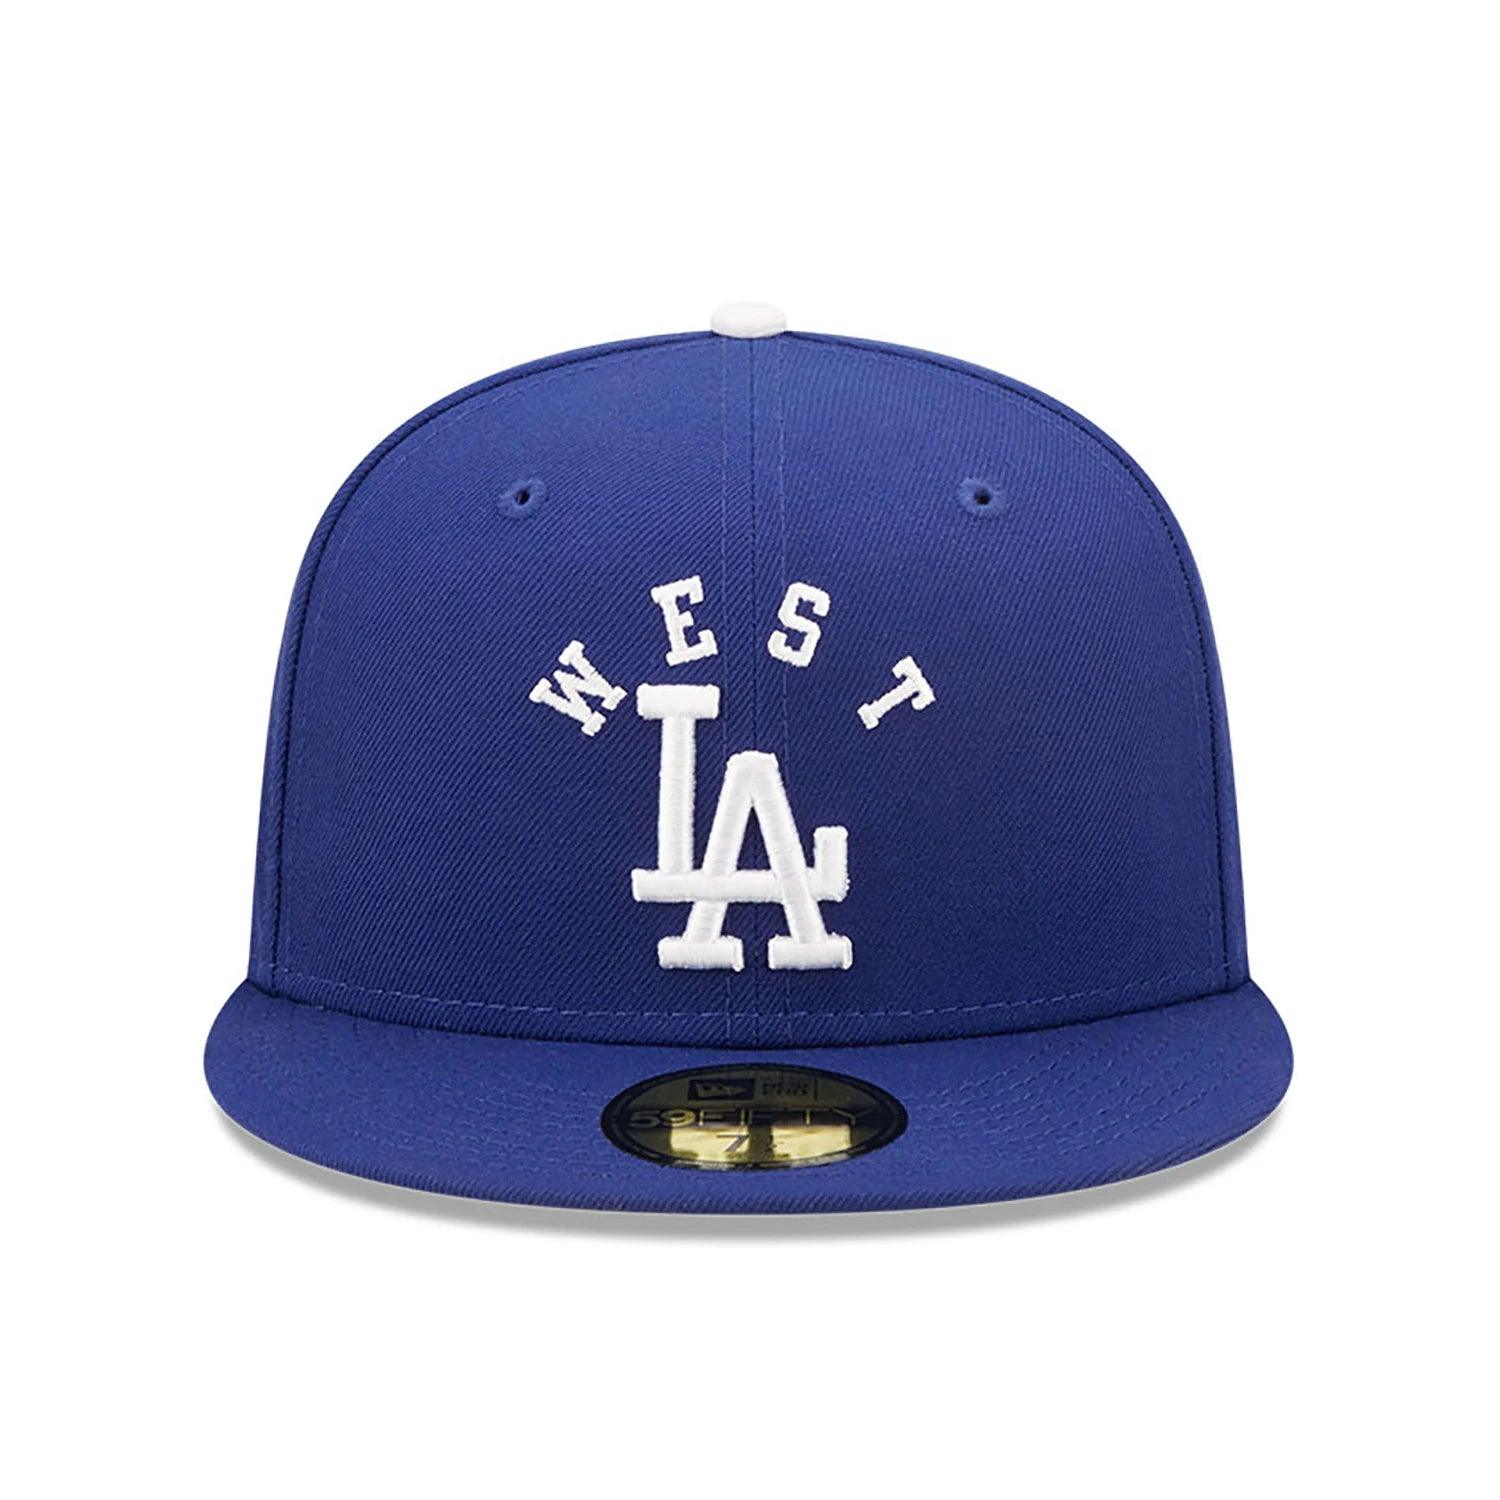 NEW ERA 59FIFTY MLB LEAGUE LOS ANGELES DODGERS TEAM BLUE FITTED CAP - FAM